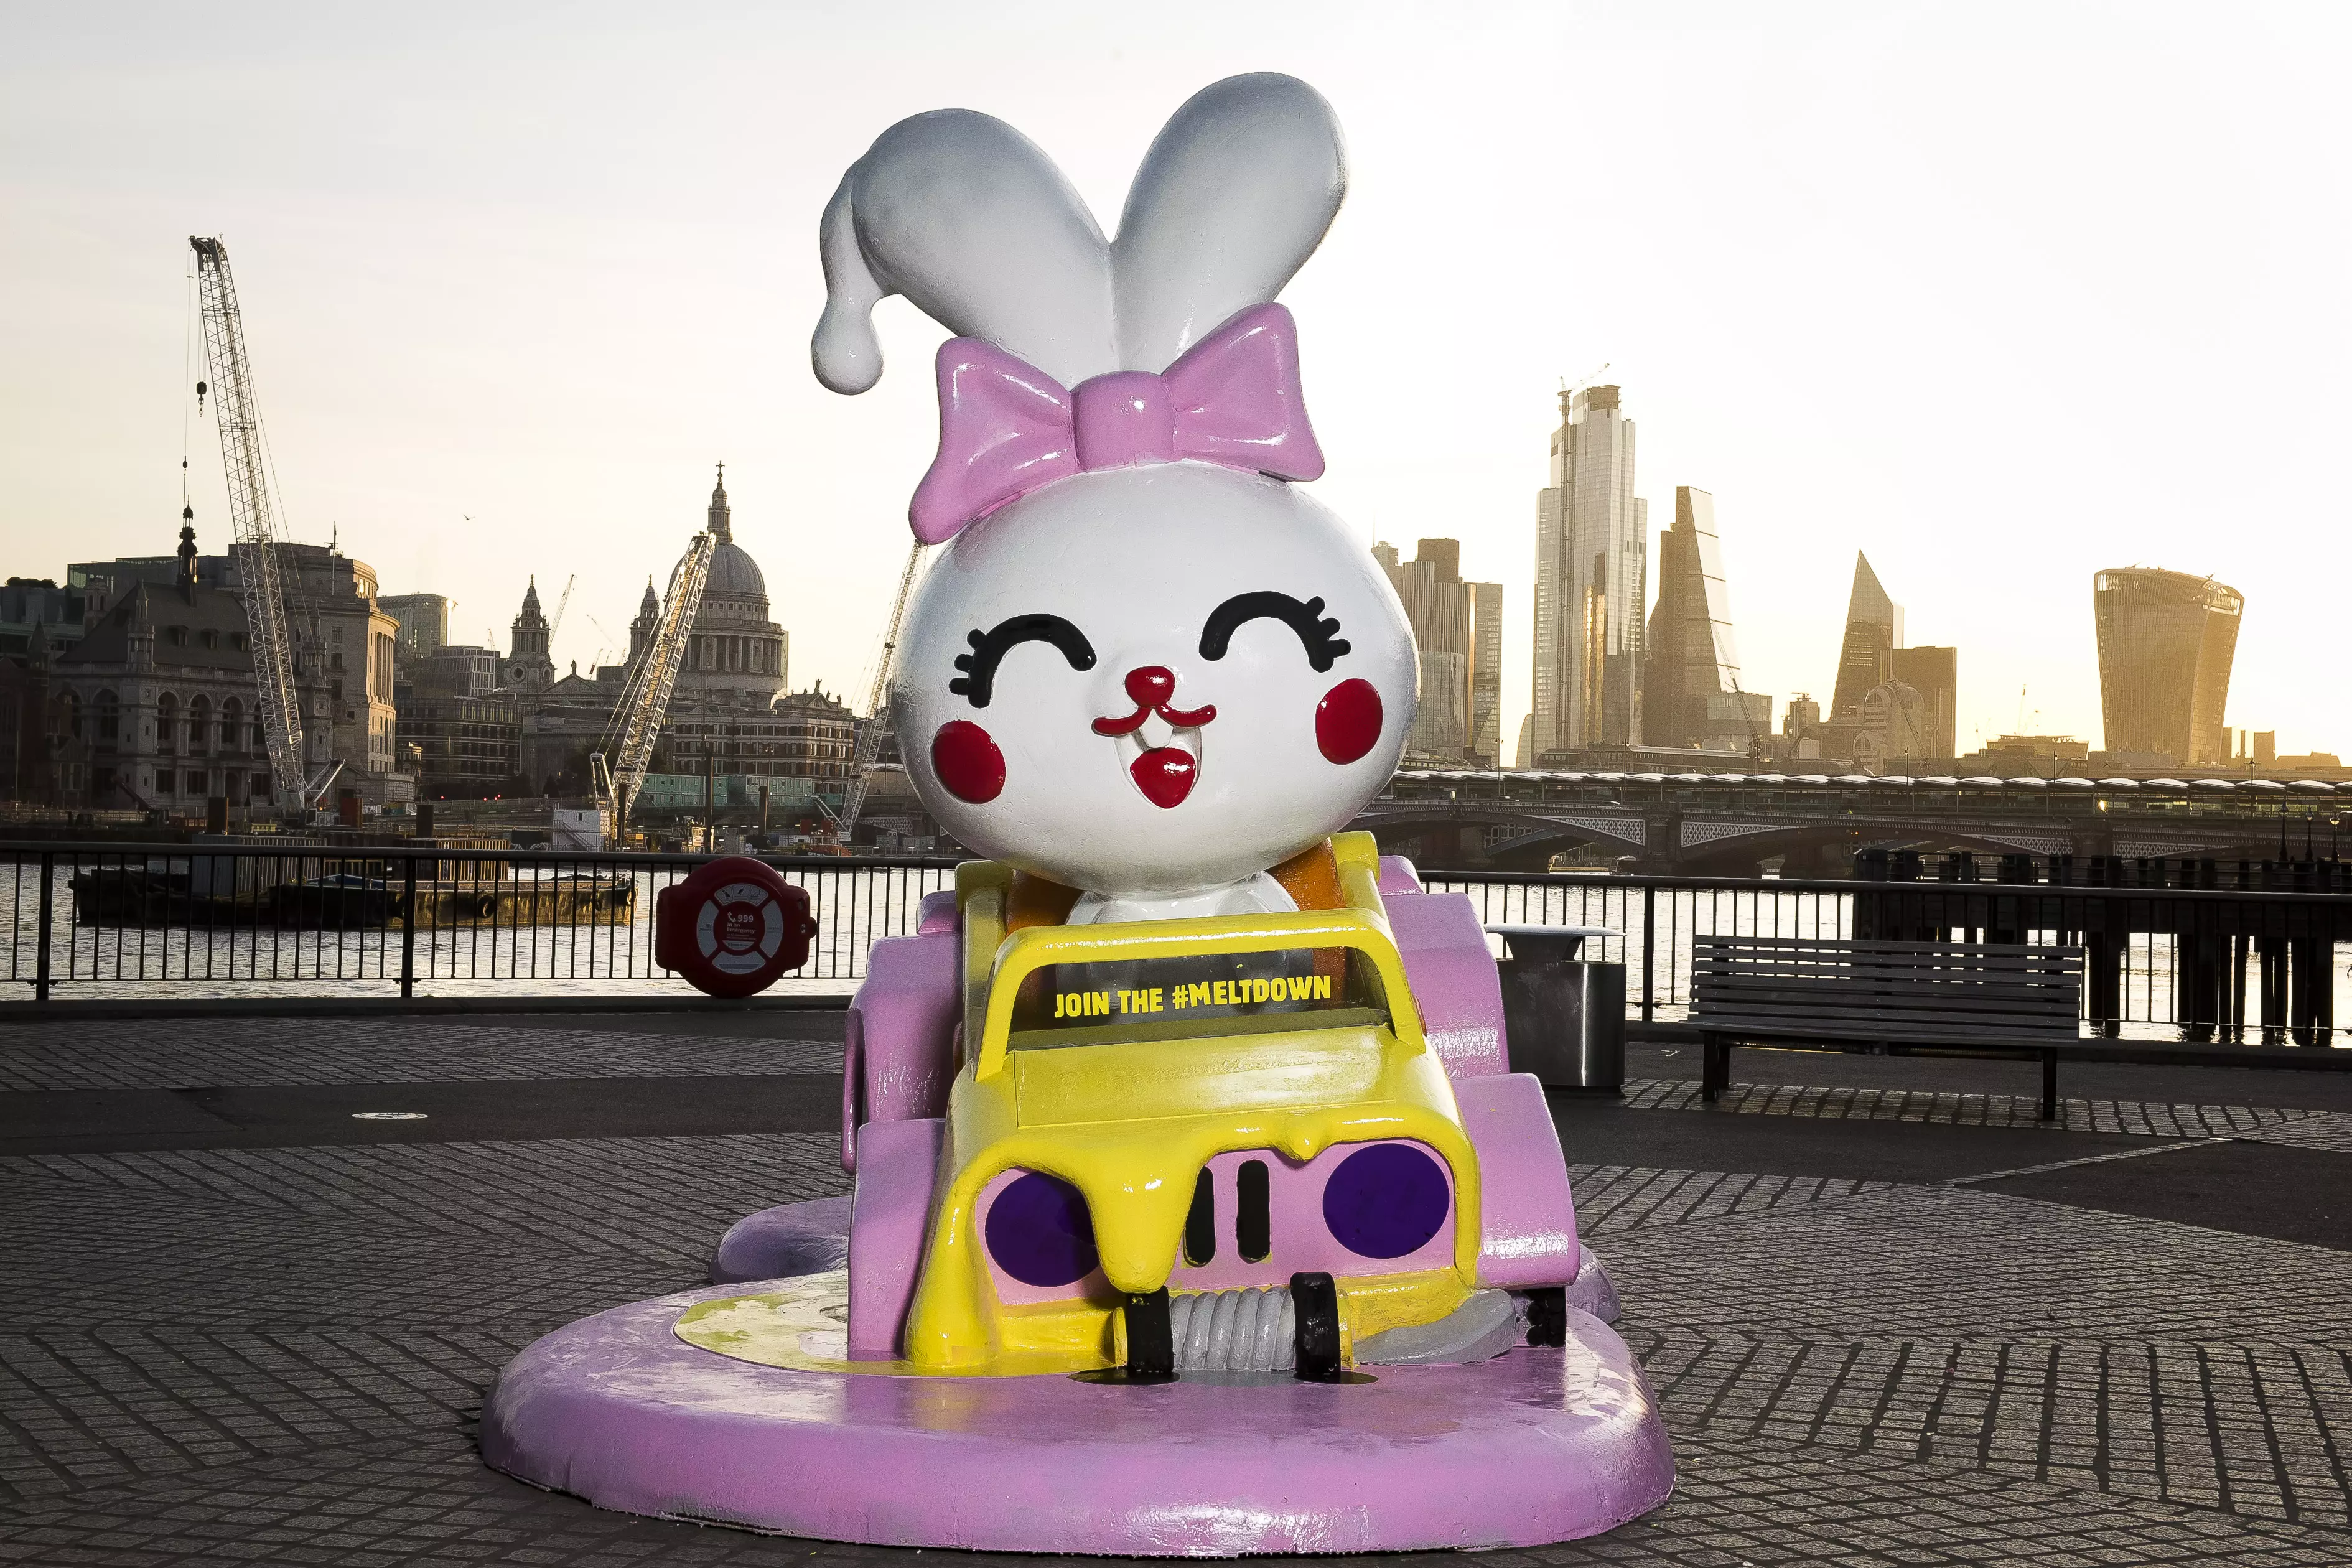 Beep Beep the bunny is designed to symbolise the major step Burger King is taking to reduce single-use plastics as part of it's 'Meltdown' campaign.